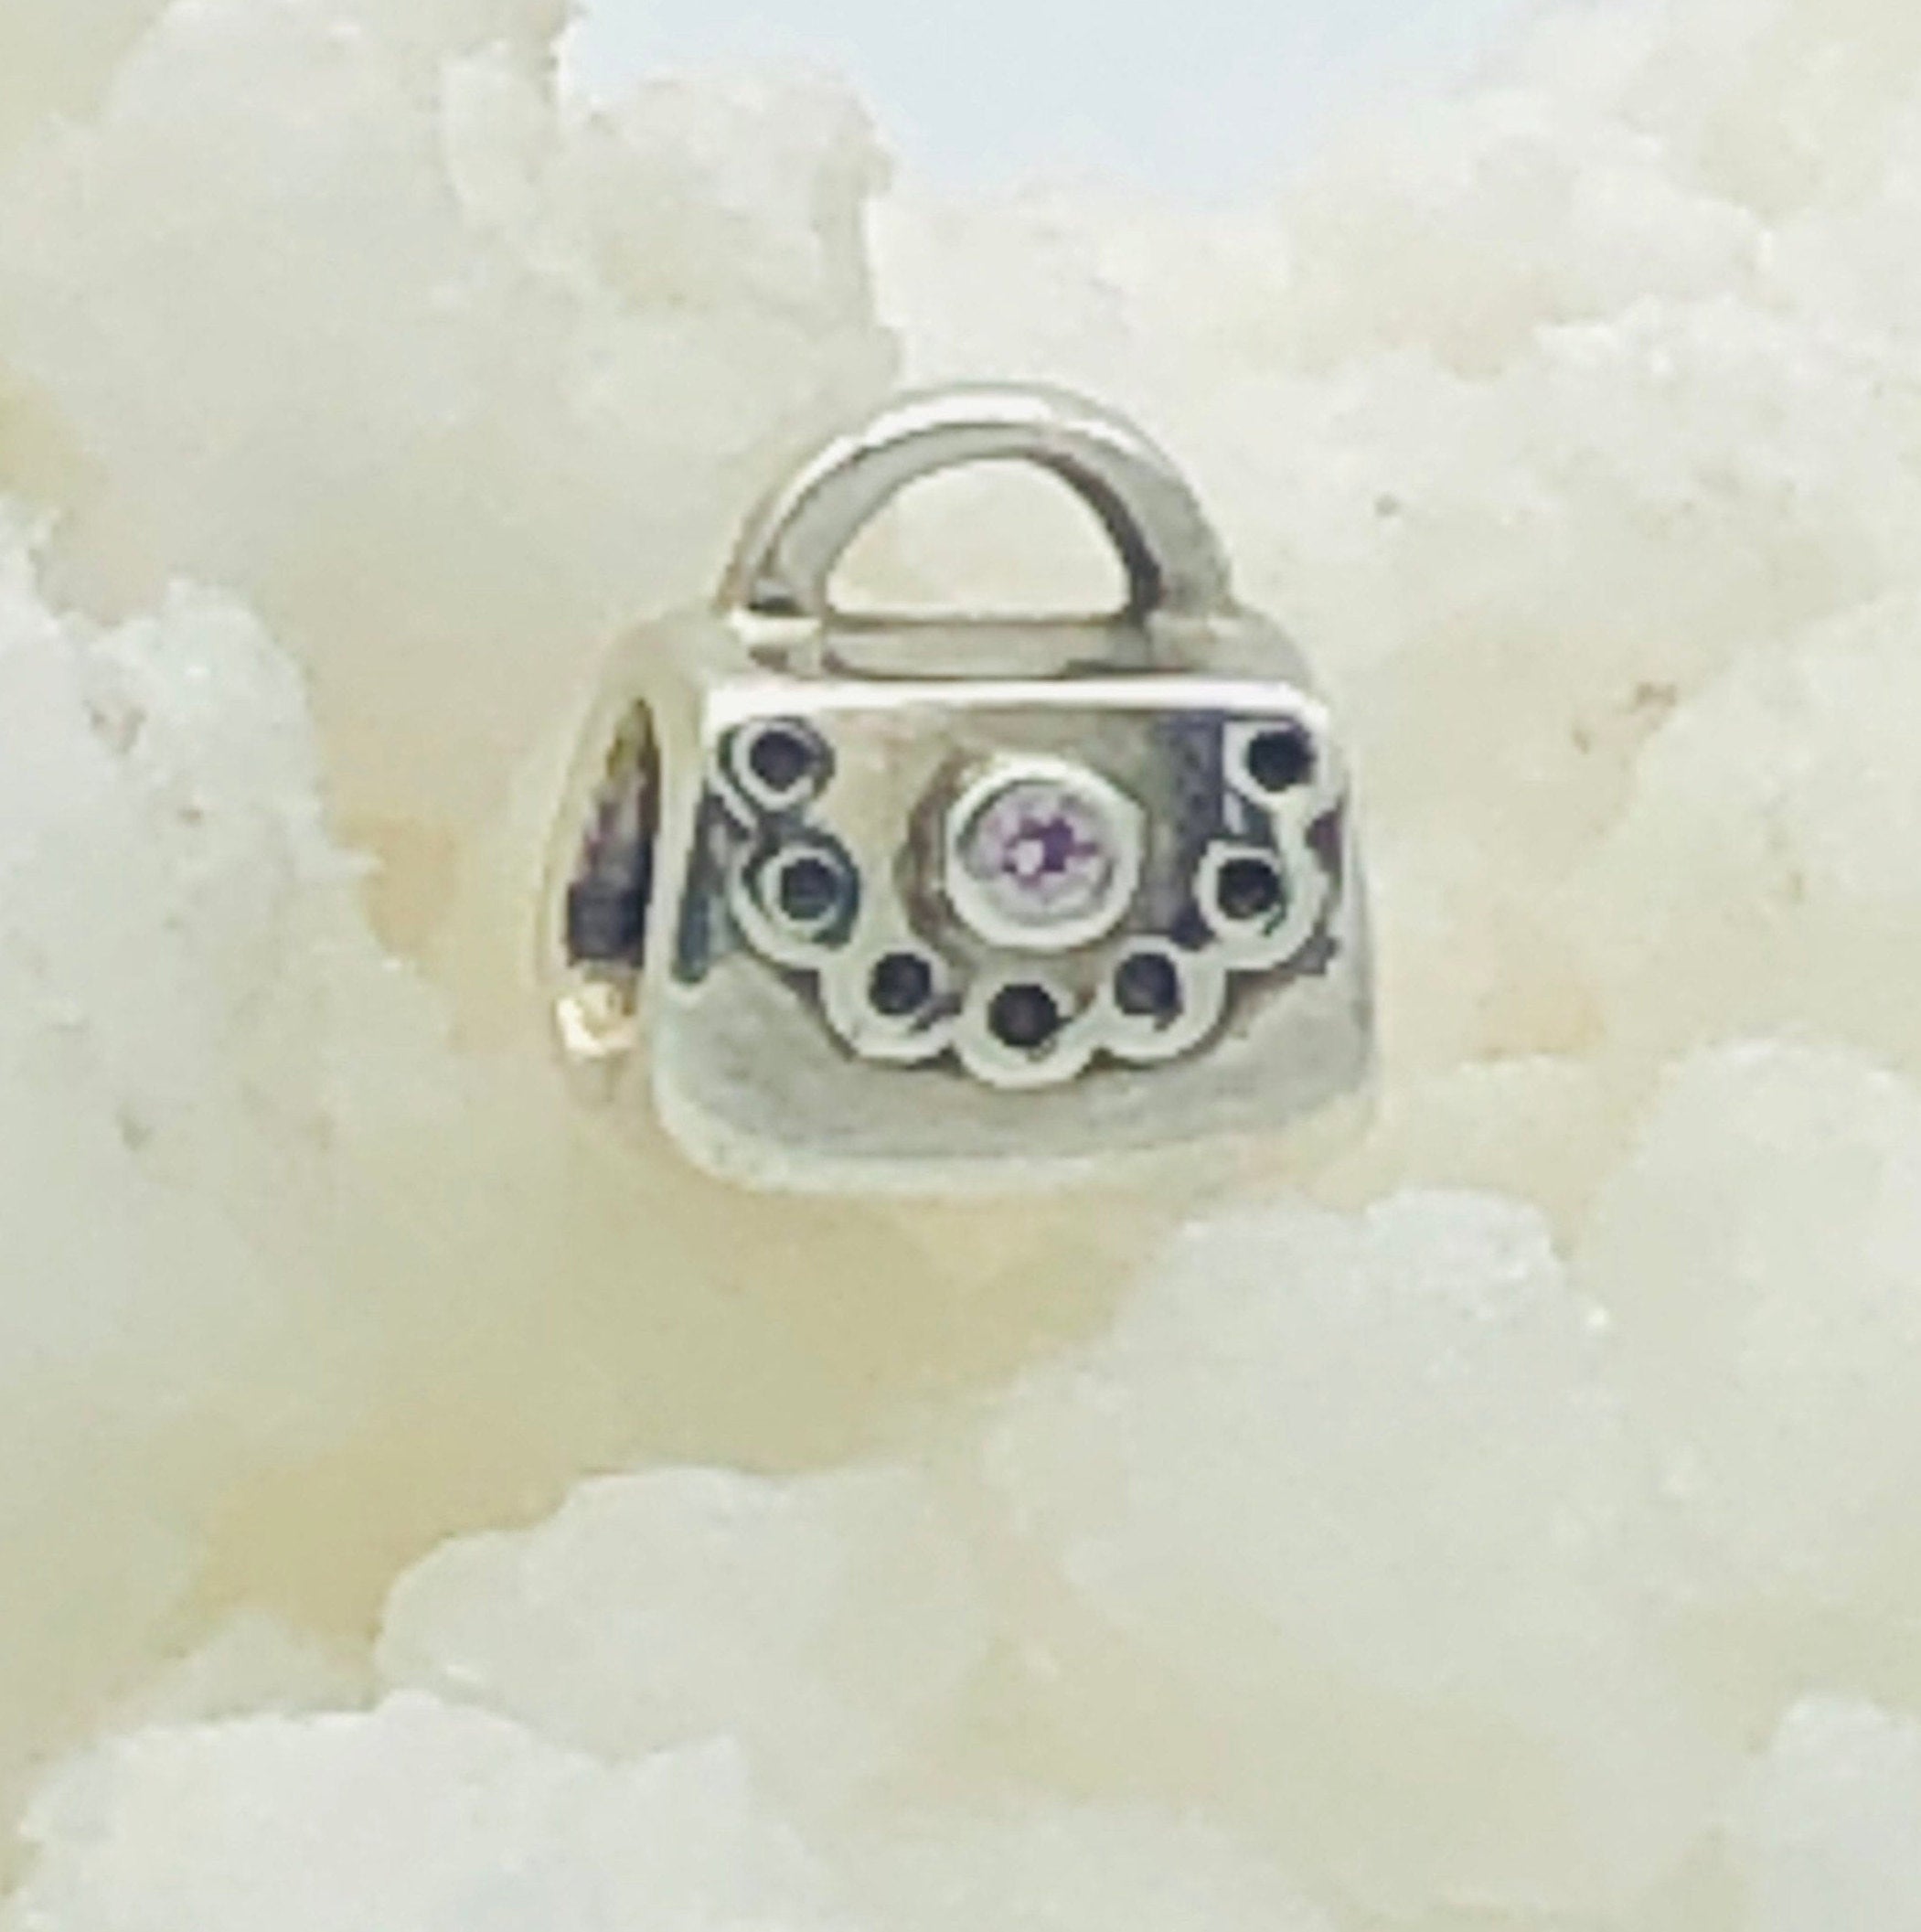 Pandora Saint Louis Galleria - New style trend: Give your purse its own  jewelry. 😍 Take your everyday accessory to the next level with our  #PandoraMoments Bag Charm Holder. | Facebook